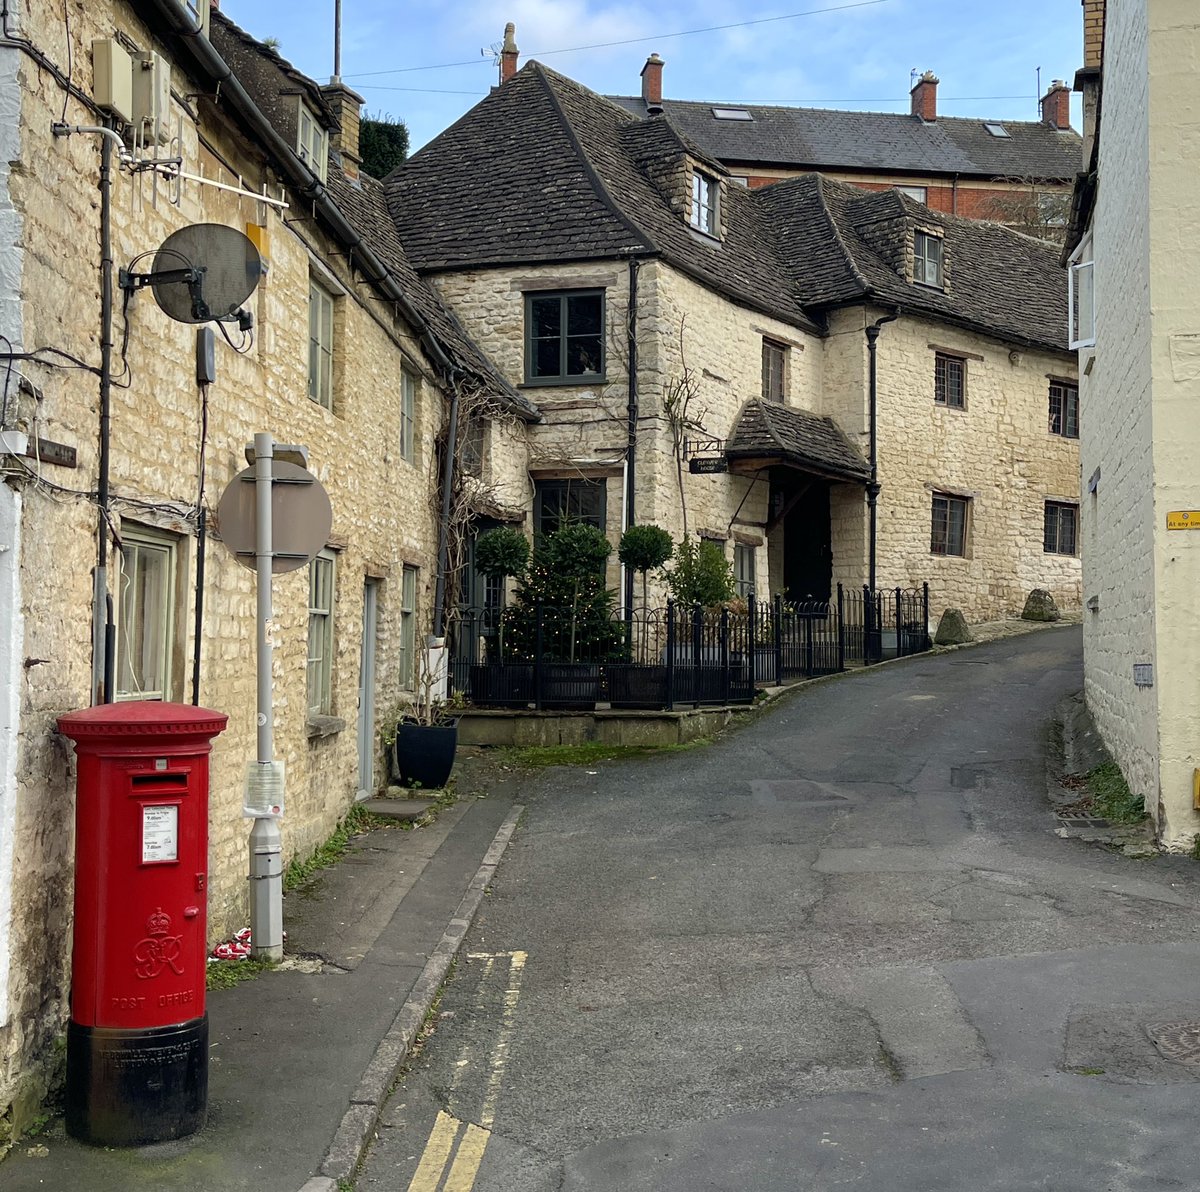 #PostboxSaturday from Nailsworth, Gloucestershire